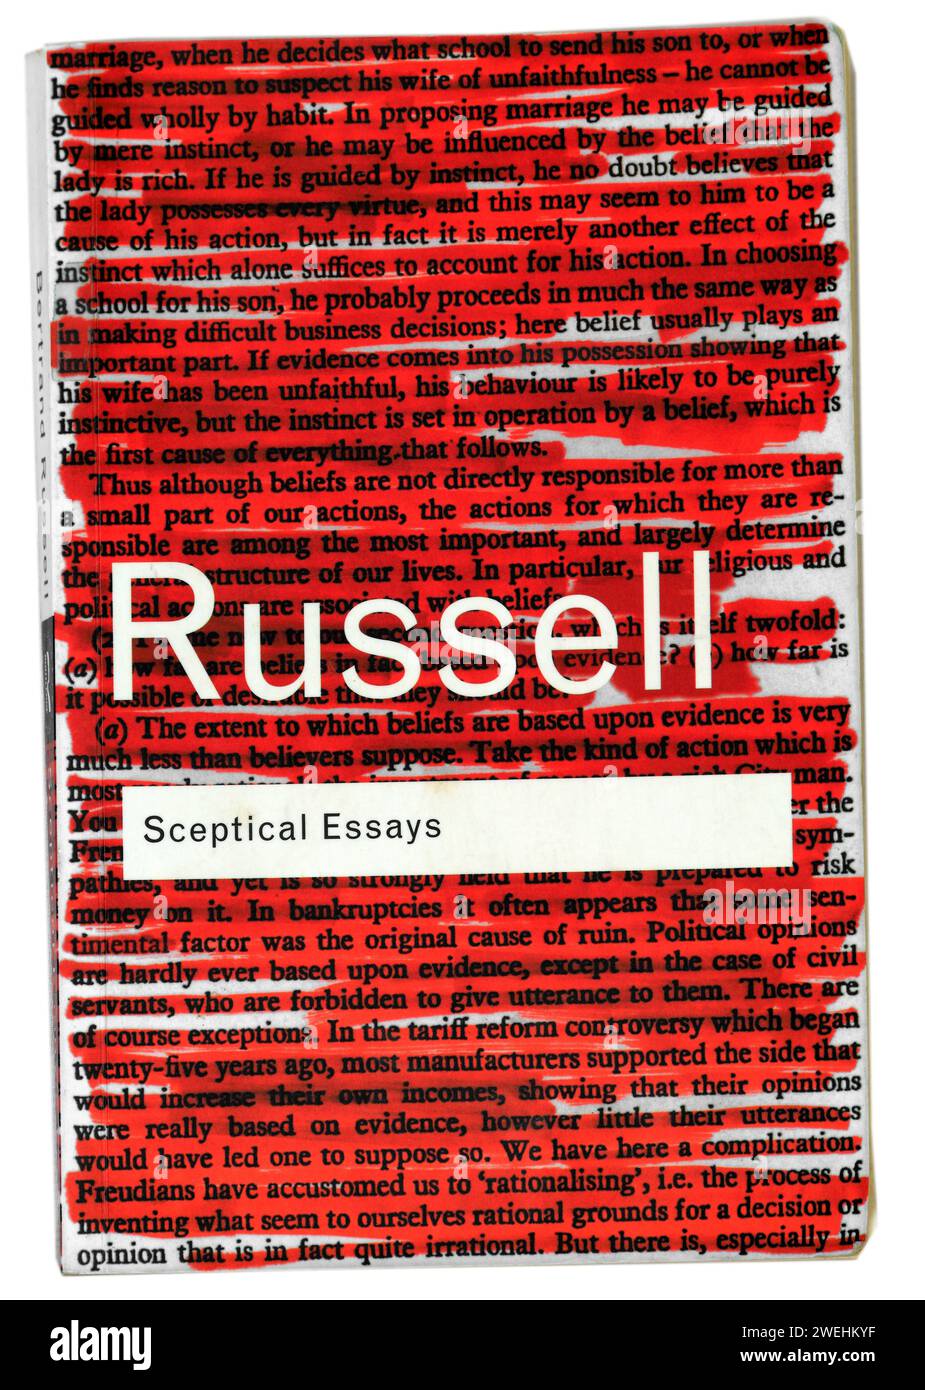 Bertrand Russell, Sceptical Essays book cover. Studio set up on light / white background Stock Photo